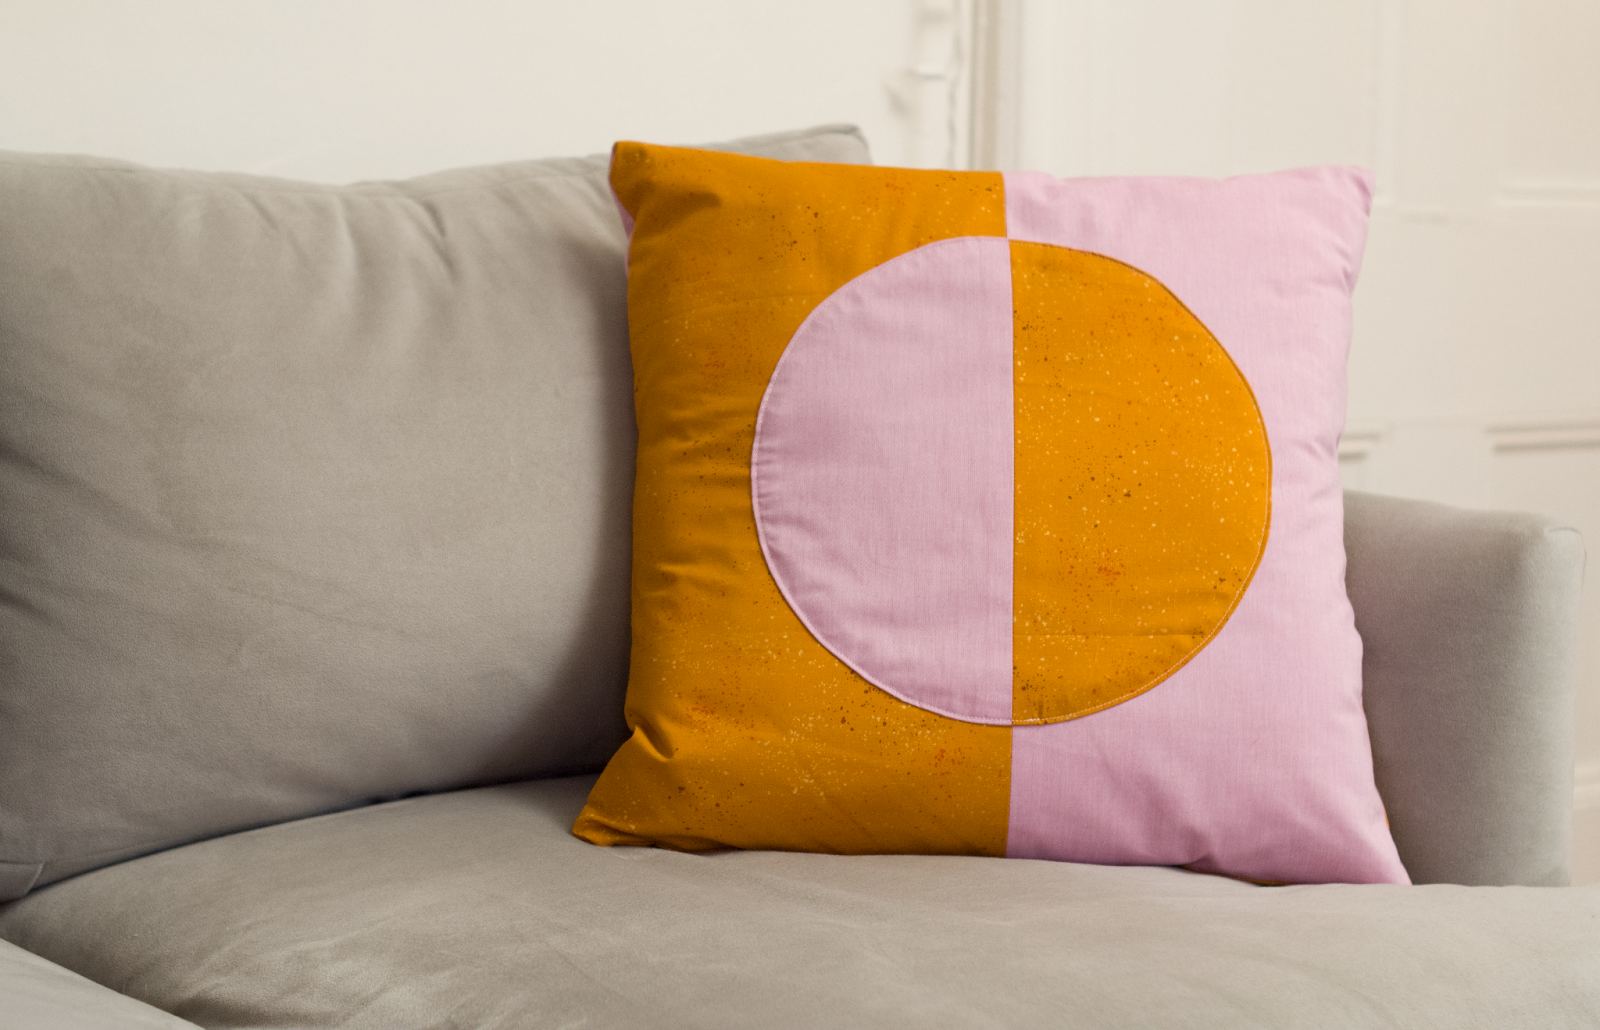 An orange and pink color-blocked pillow sits on a gray couch.